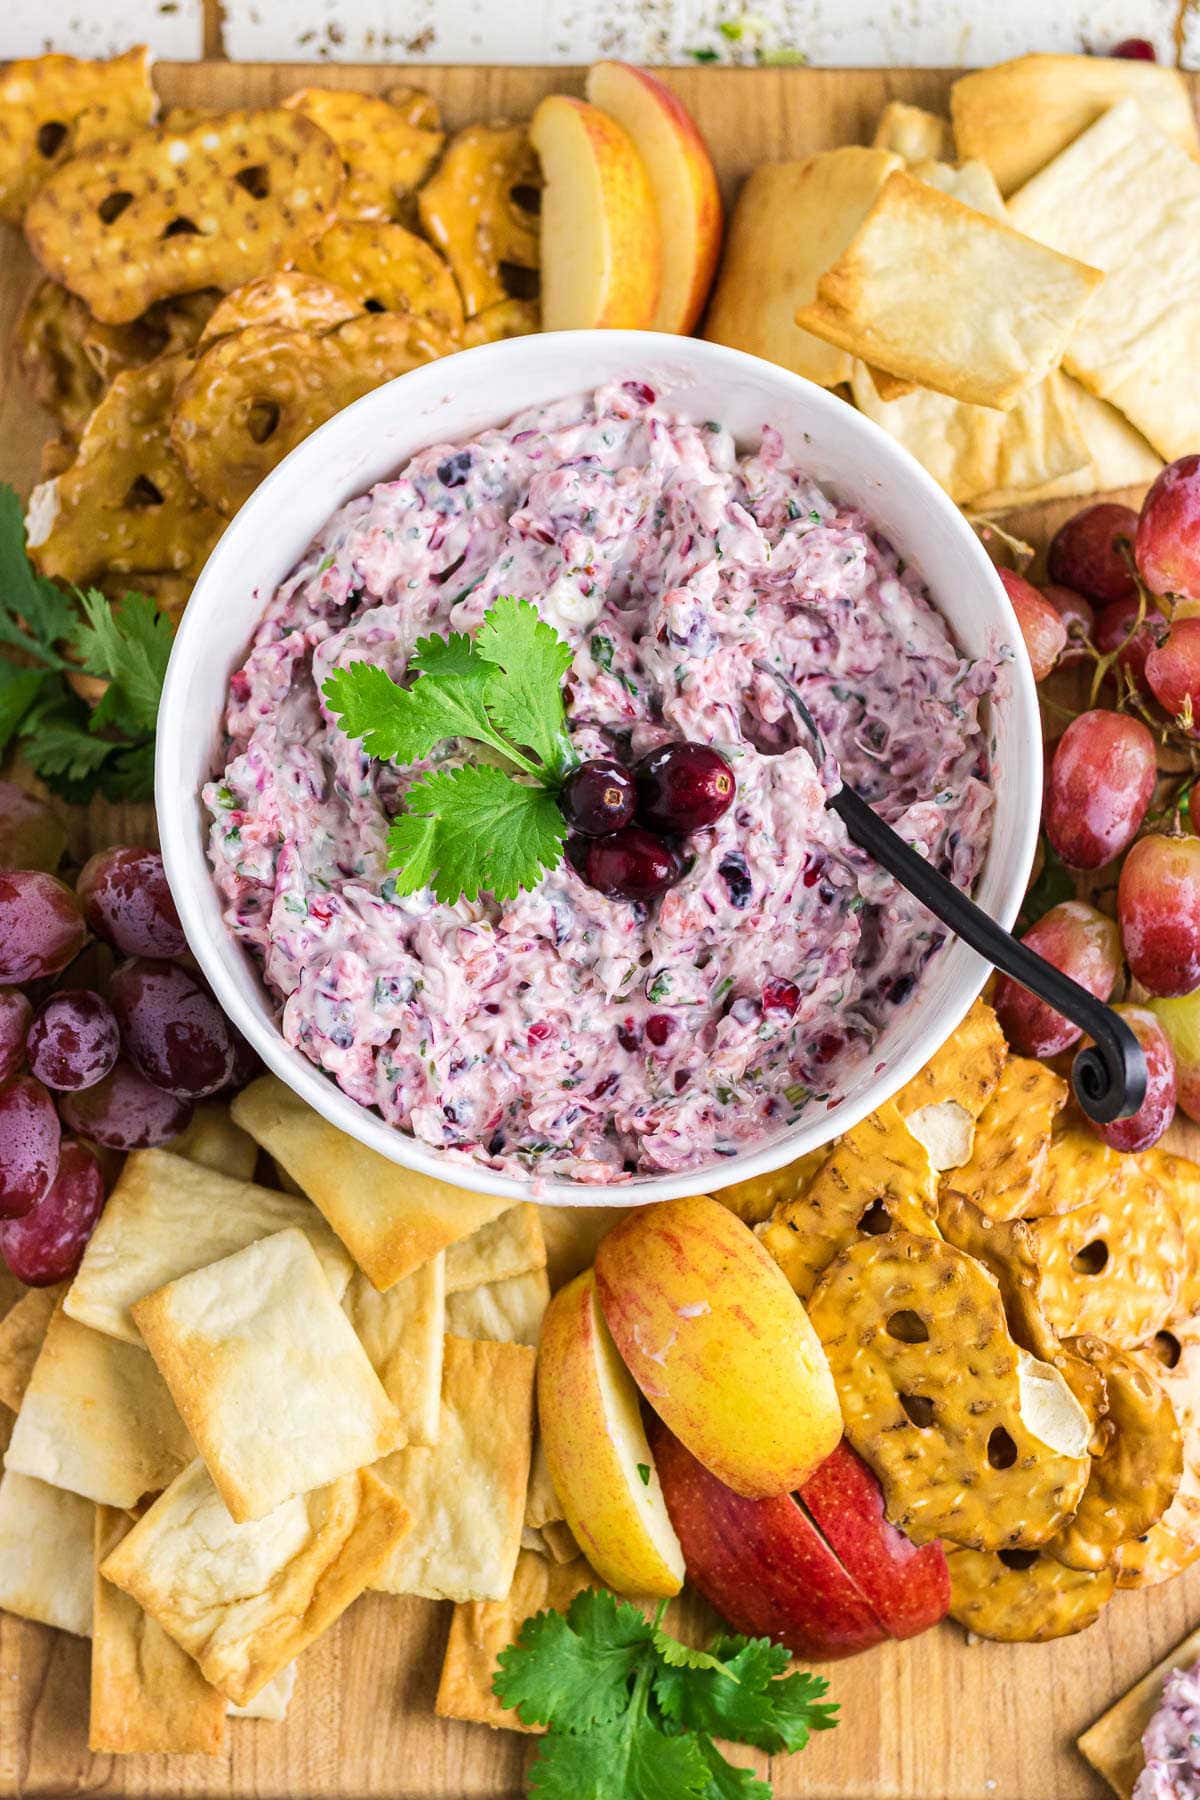 Cranberry jalapeno dip in a white bowl surrounded by chips, pretzels, and fruit.